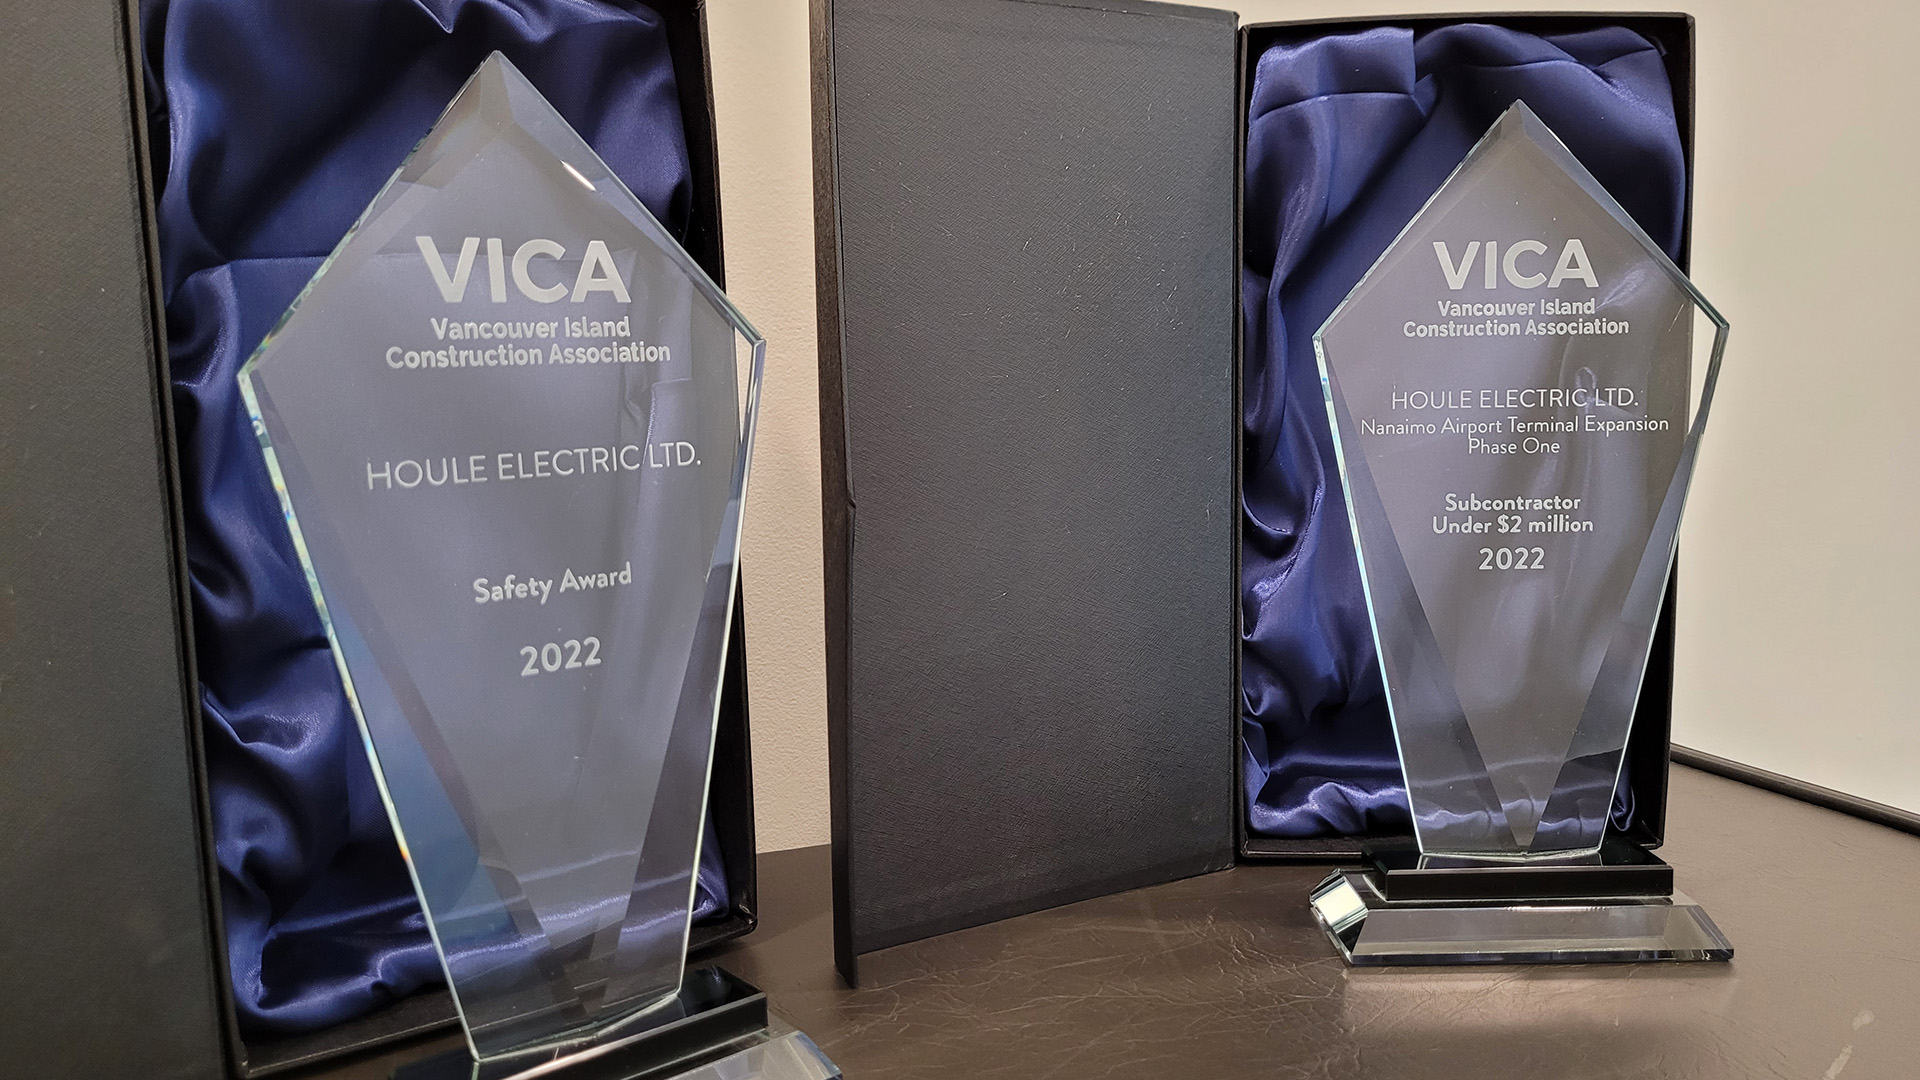 Vancouver Island Construction Association (VICA) 2022 Awards - Safety Excellence Award and Subcontractor Award Under $2 Million for the Nanaimo Airport Terminal Project